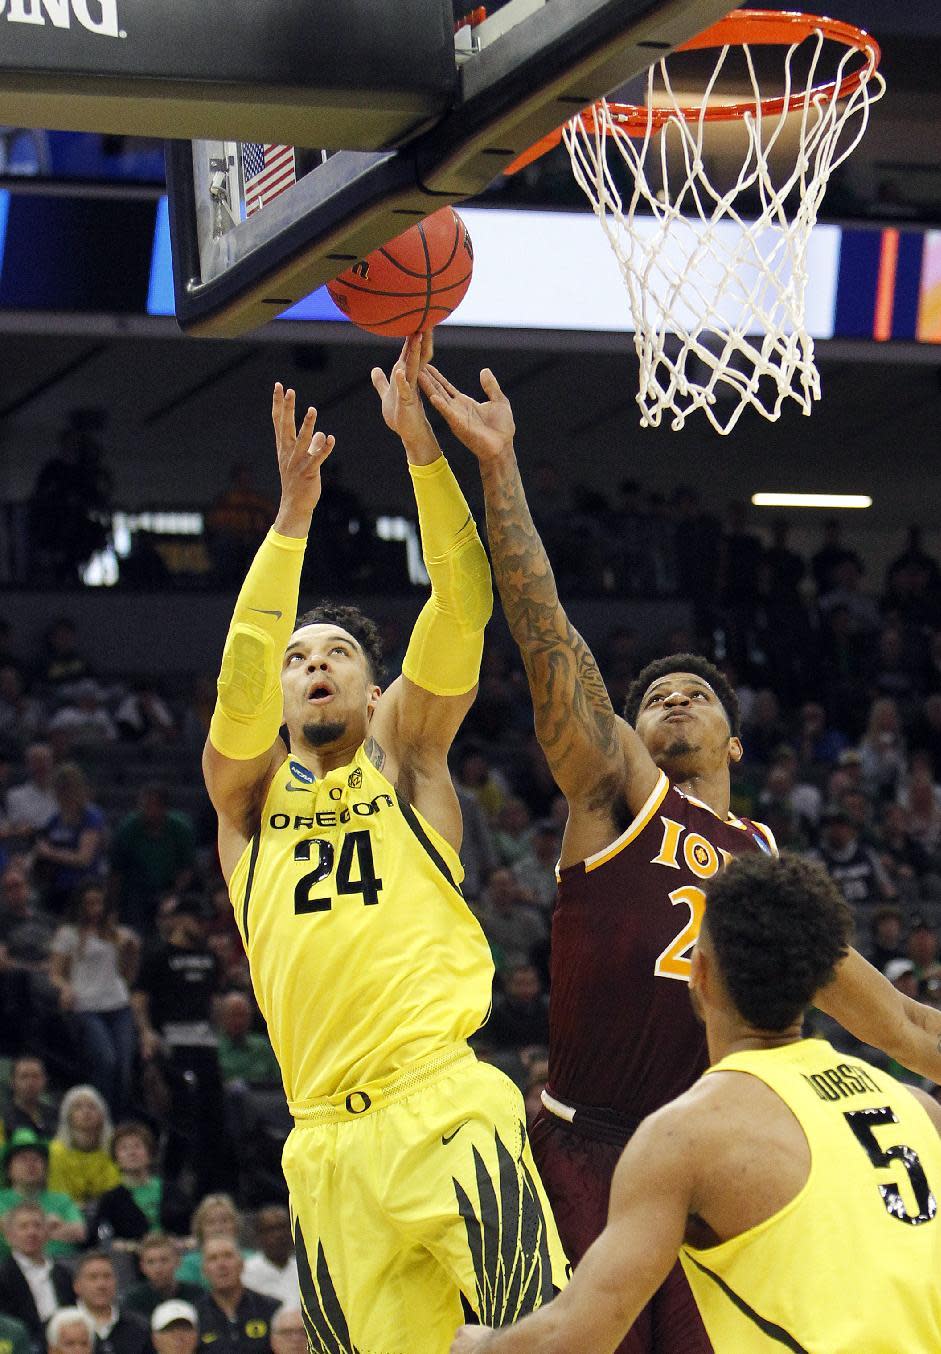 Oregon forward Dillon Brooks, left, and Iona forward Jordan Washington, right, battle for a rebound during the first half of a first-round game in the men's NCAA college basketball tournament in Sacramento, Calif., Friday, March 17, 2017. (AP Photo/Steve Yeater)